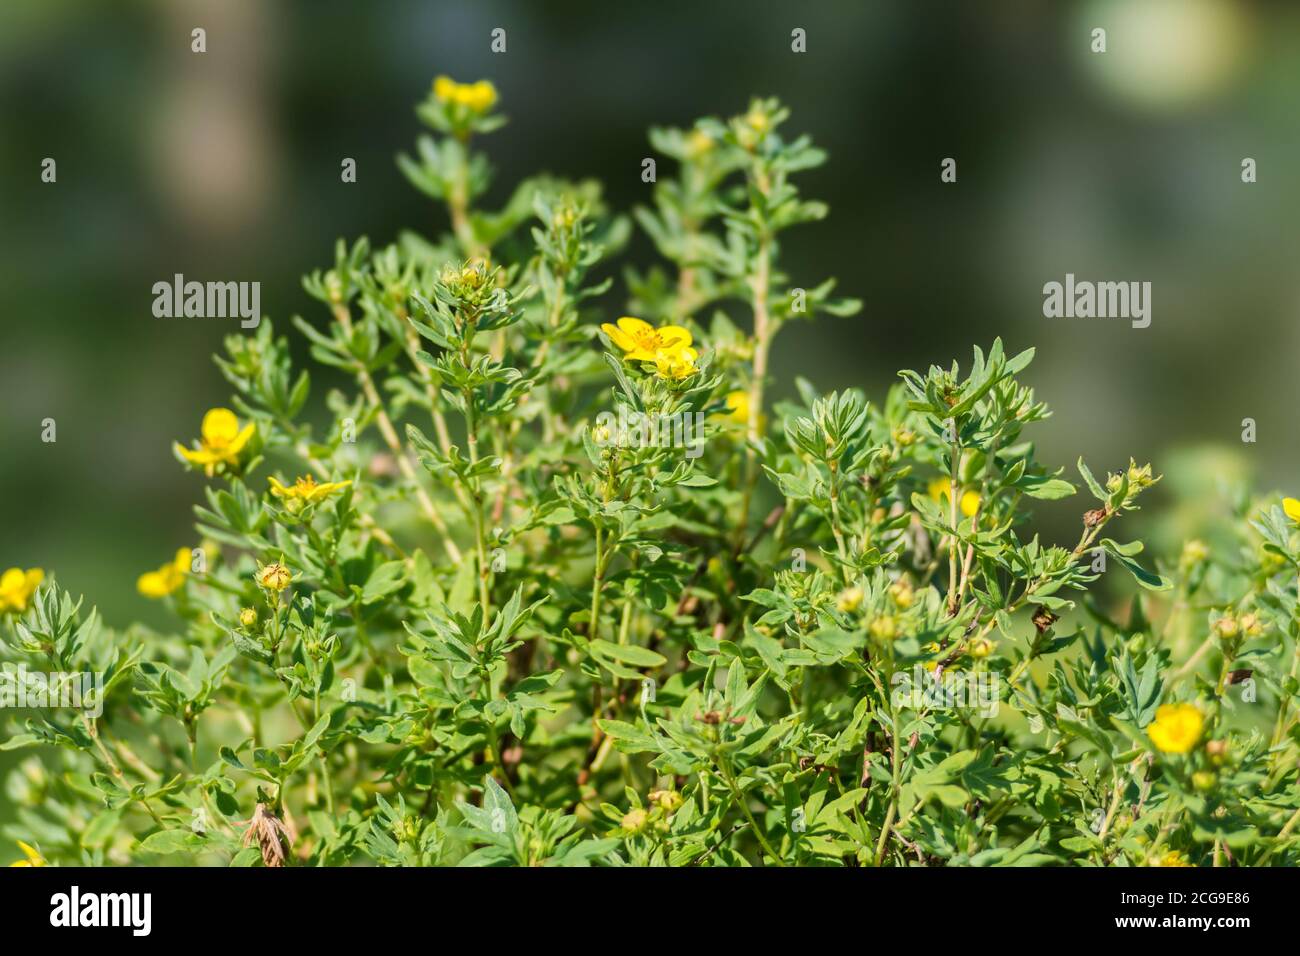 Blooming bush of a wild cinquefoil (Pentaphylloides fruticosa) on a dark green natural background. Stock Photo